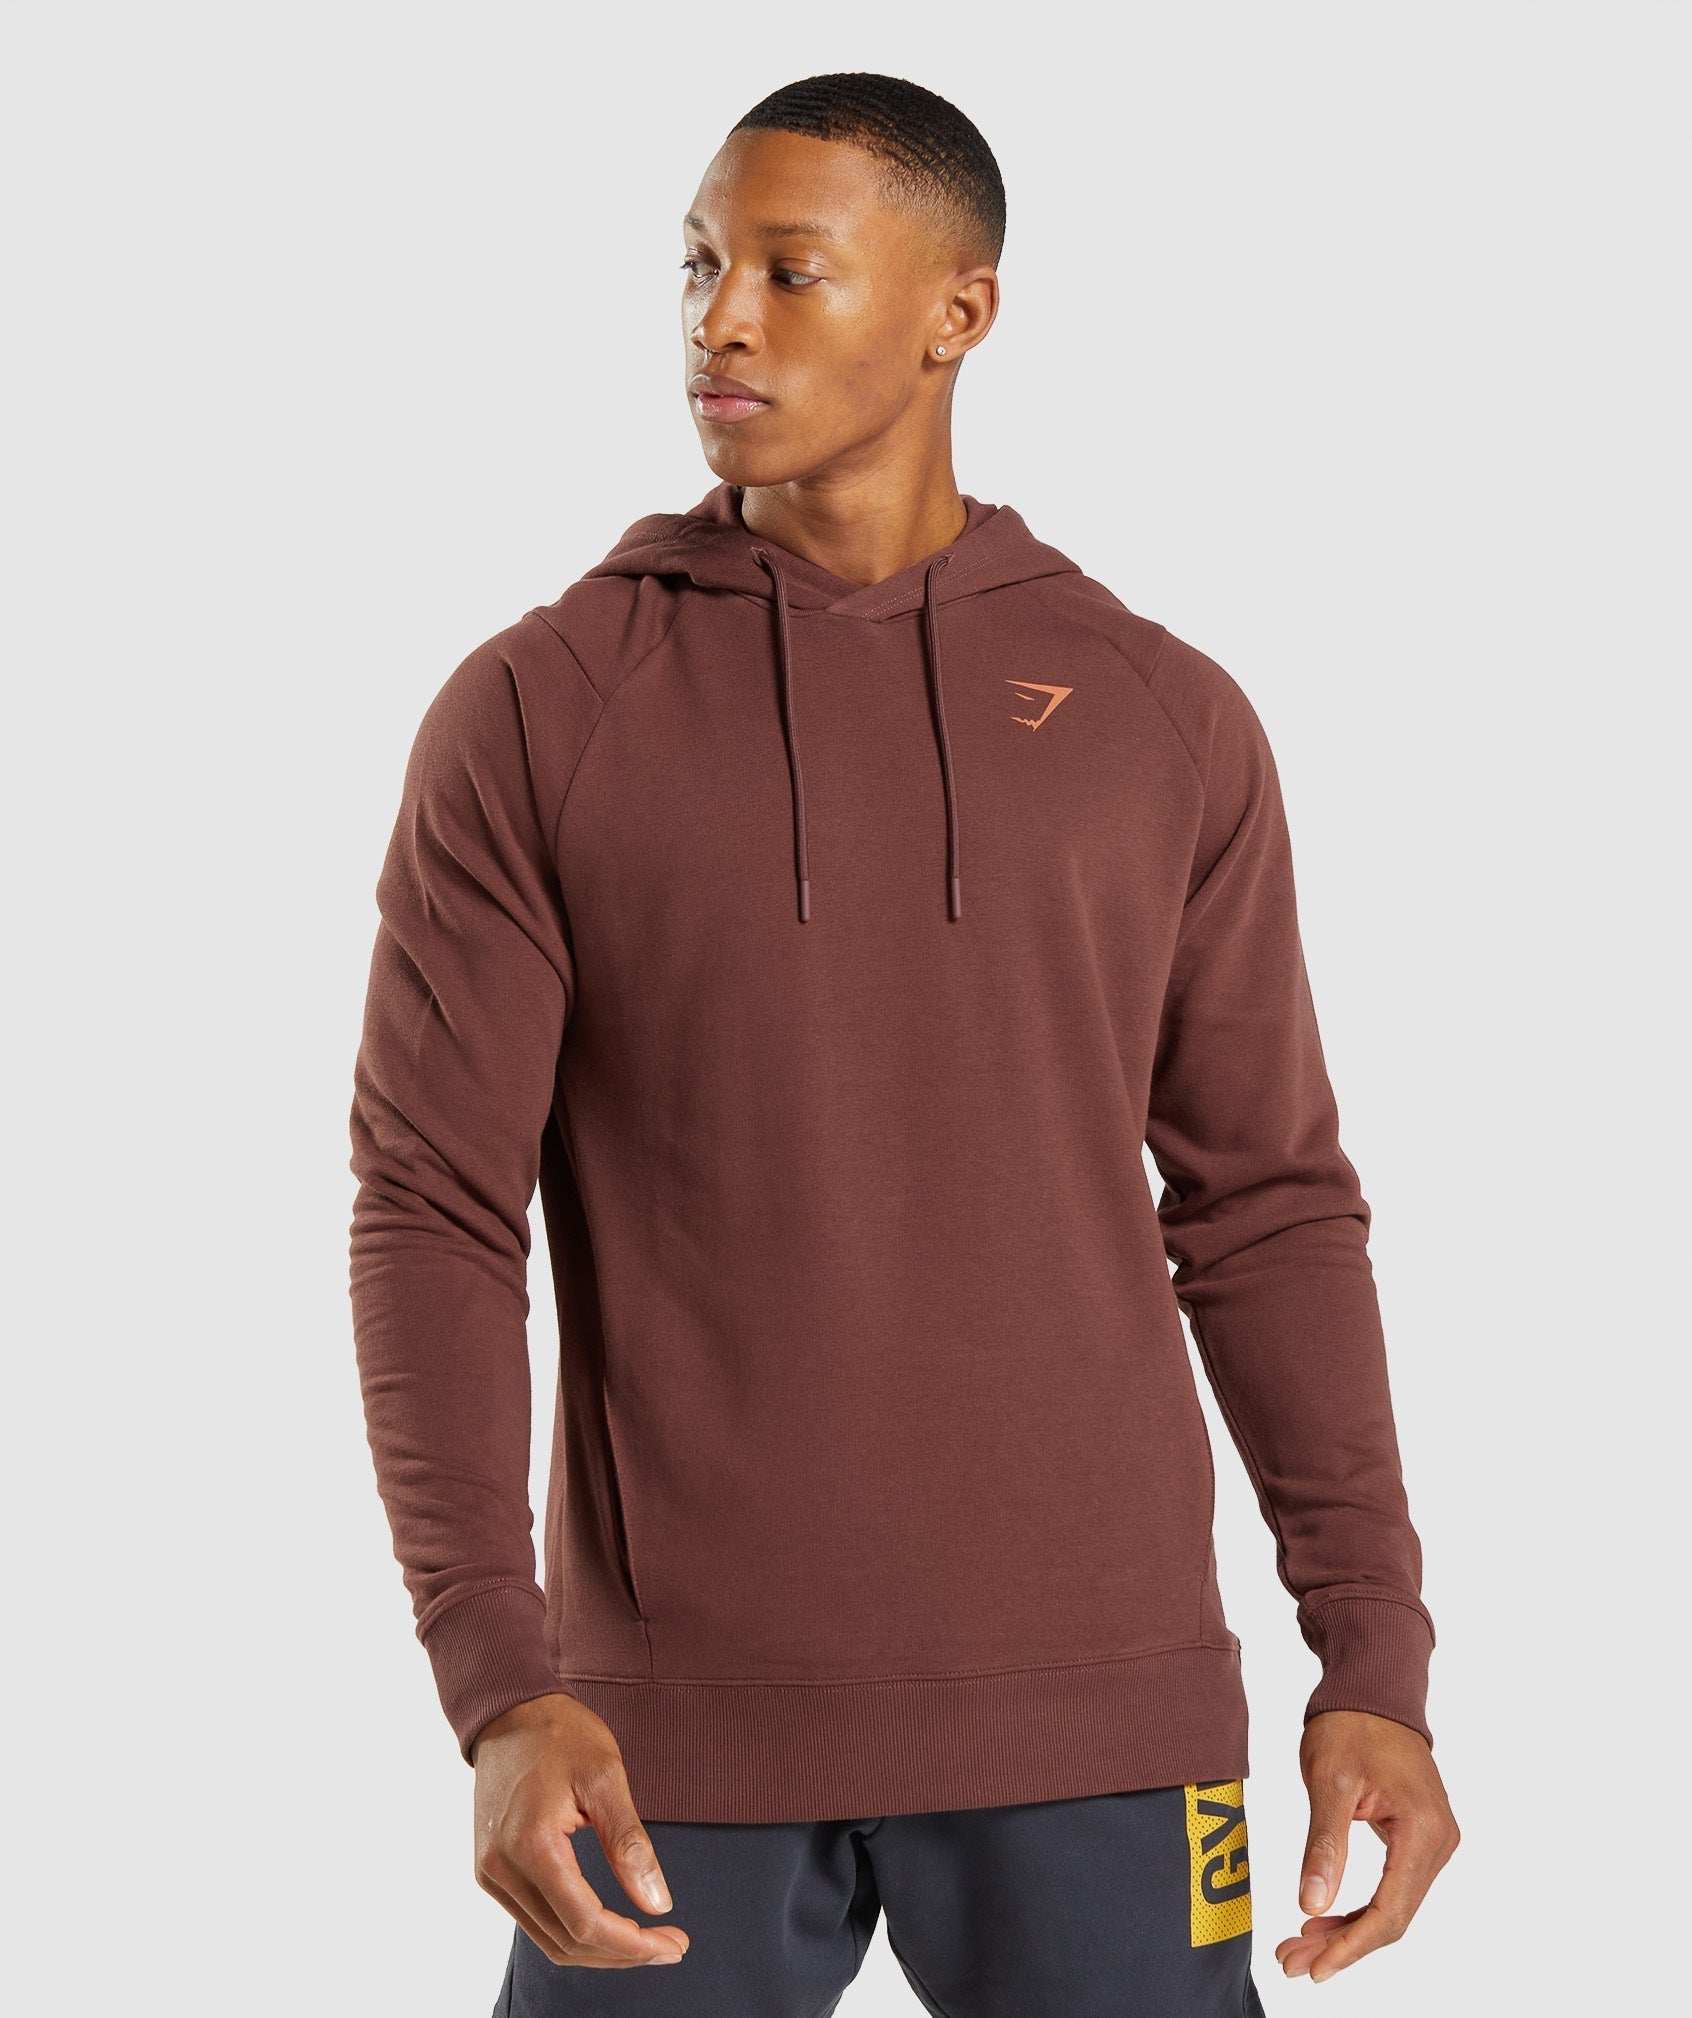 Bold Hoodie in Cherry Brown - view 2